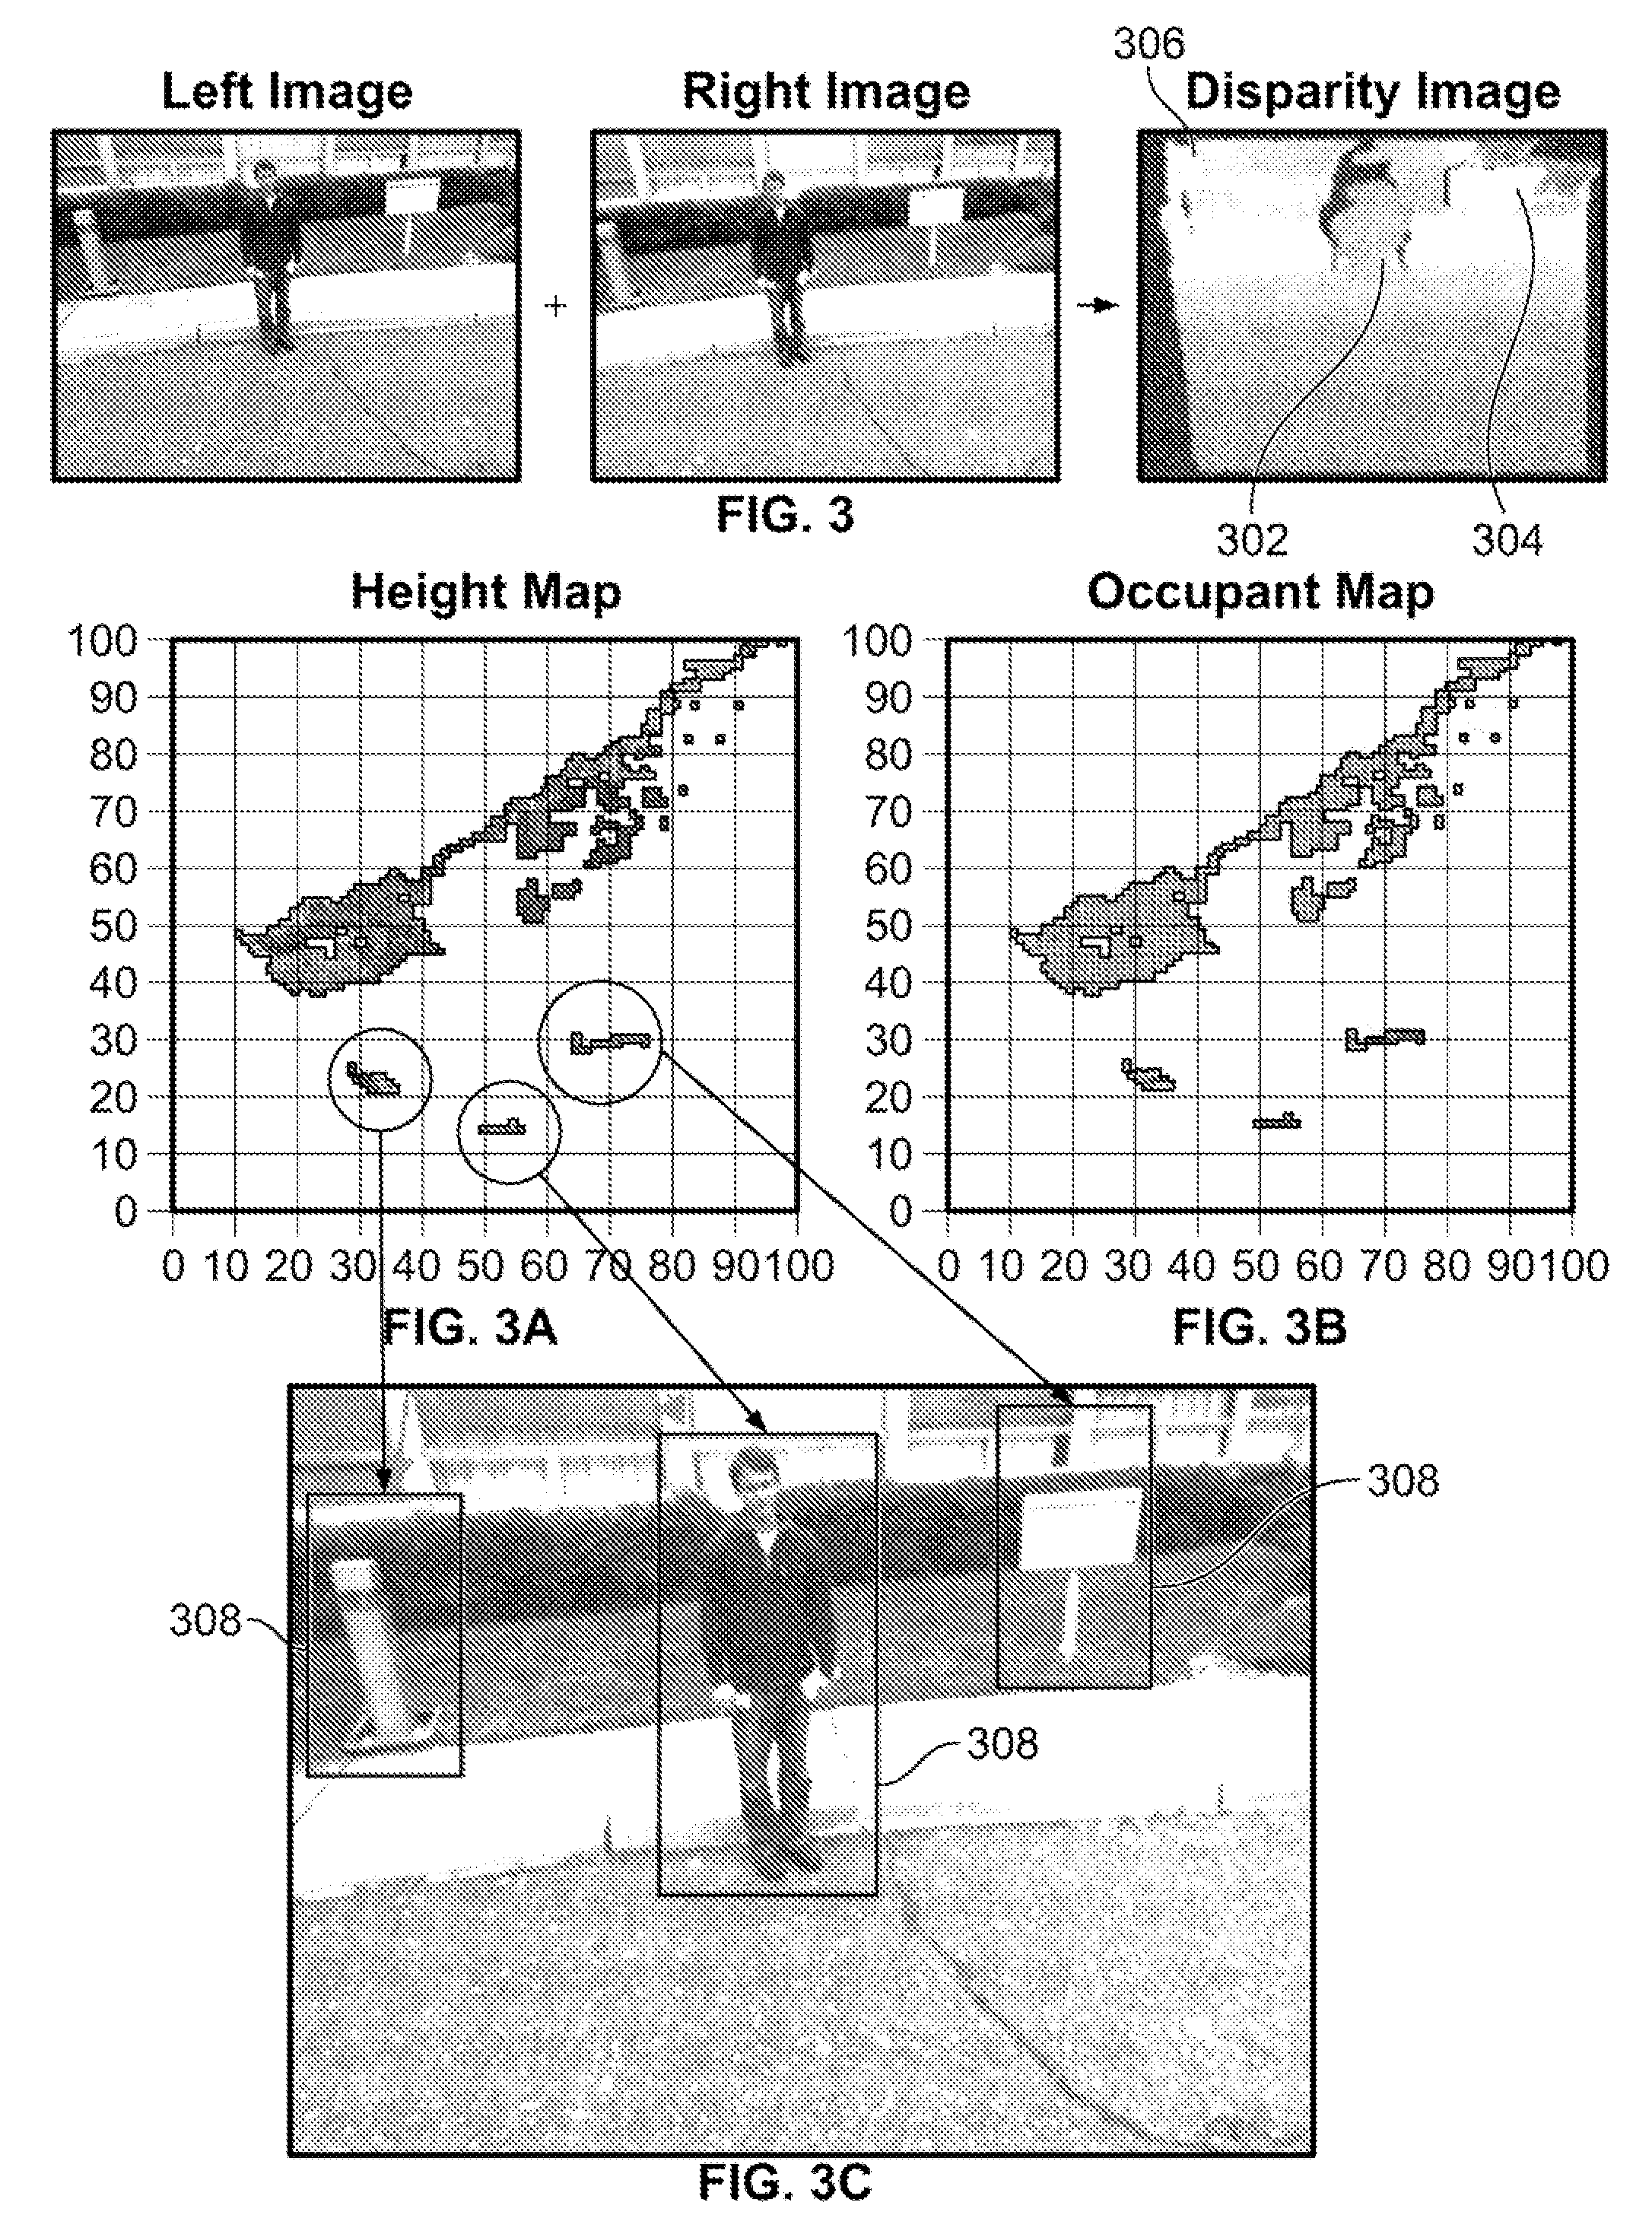 System and method for detecting still objects in images